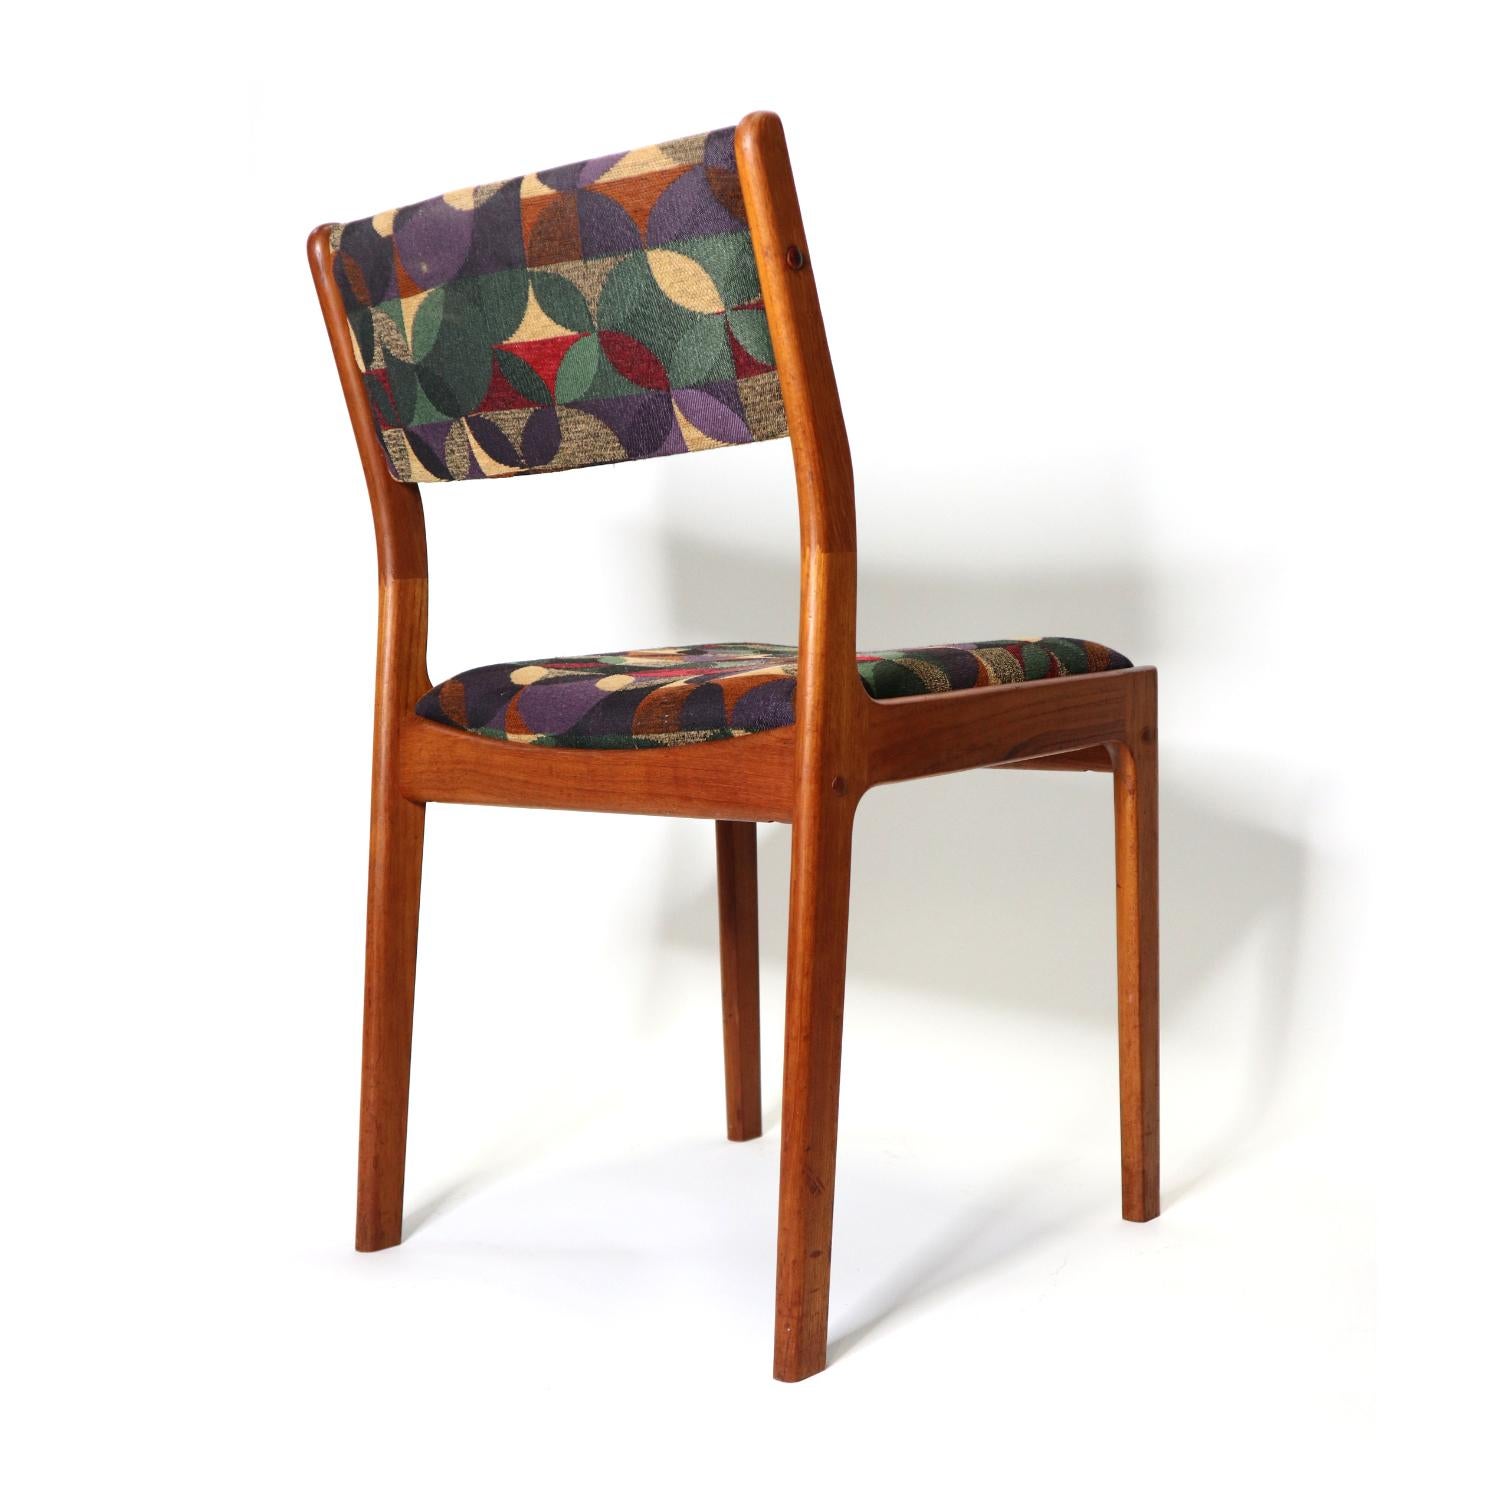 Danish Teak Dining Chairs in Green Red and Dijon Knoll Fabric 2